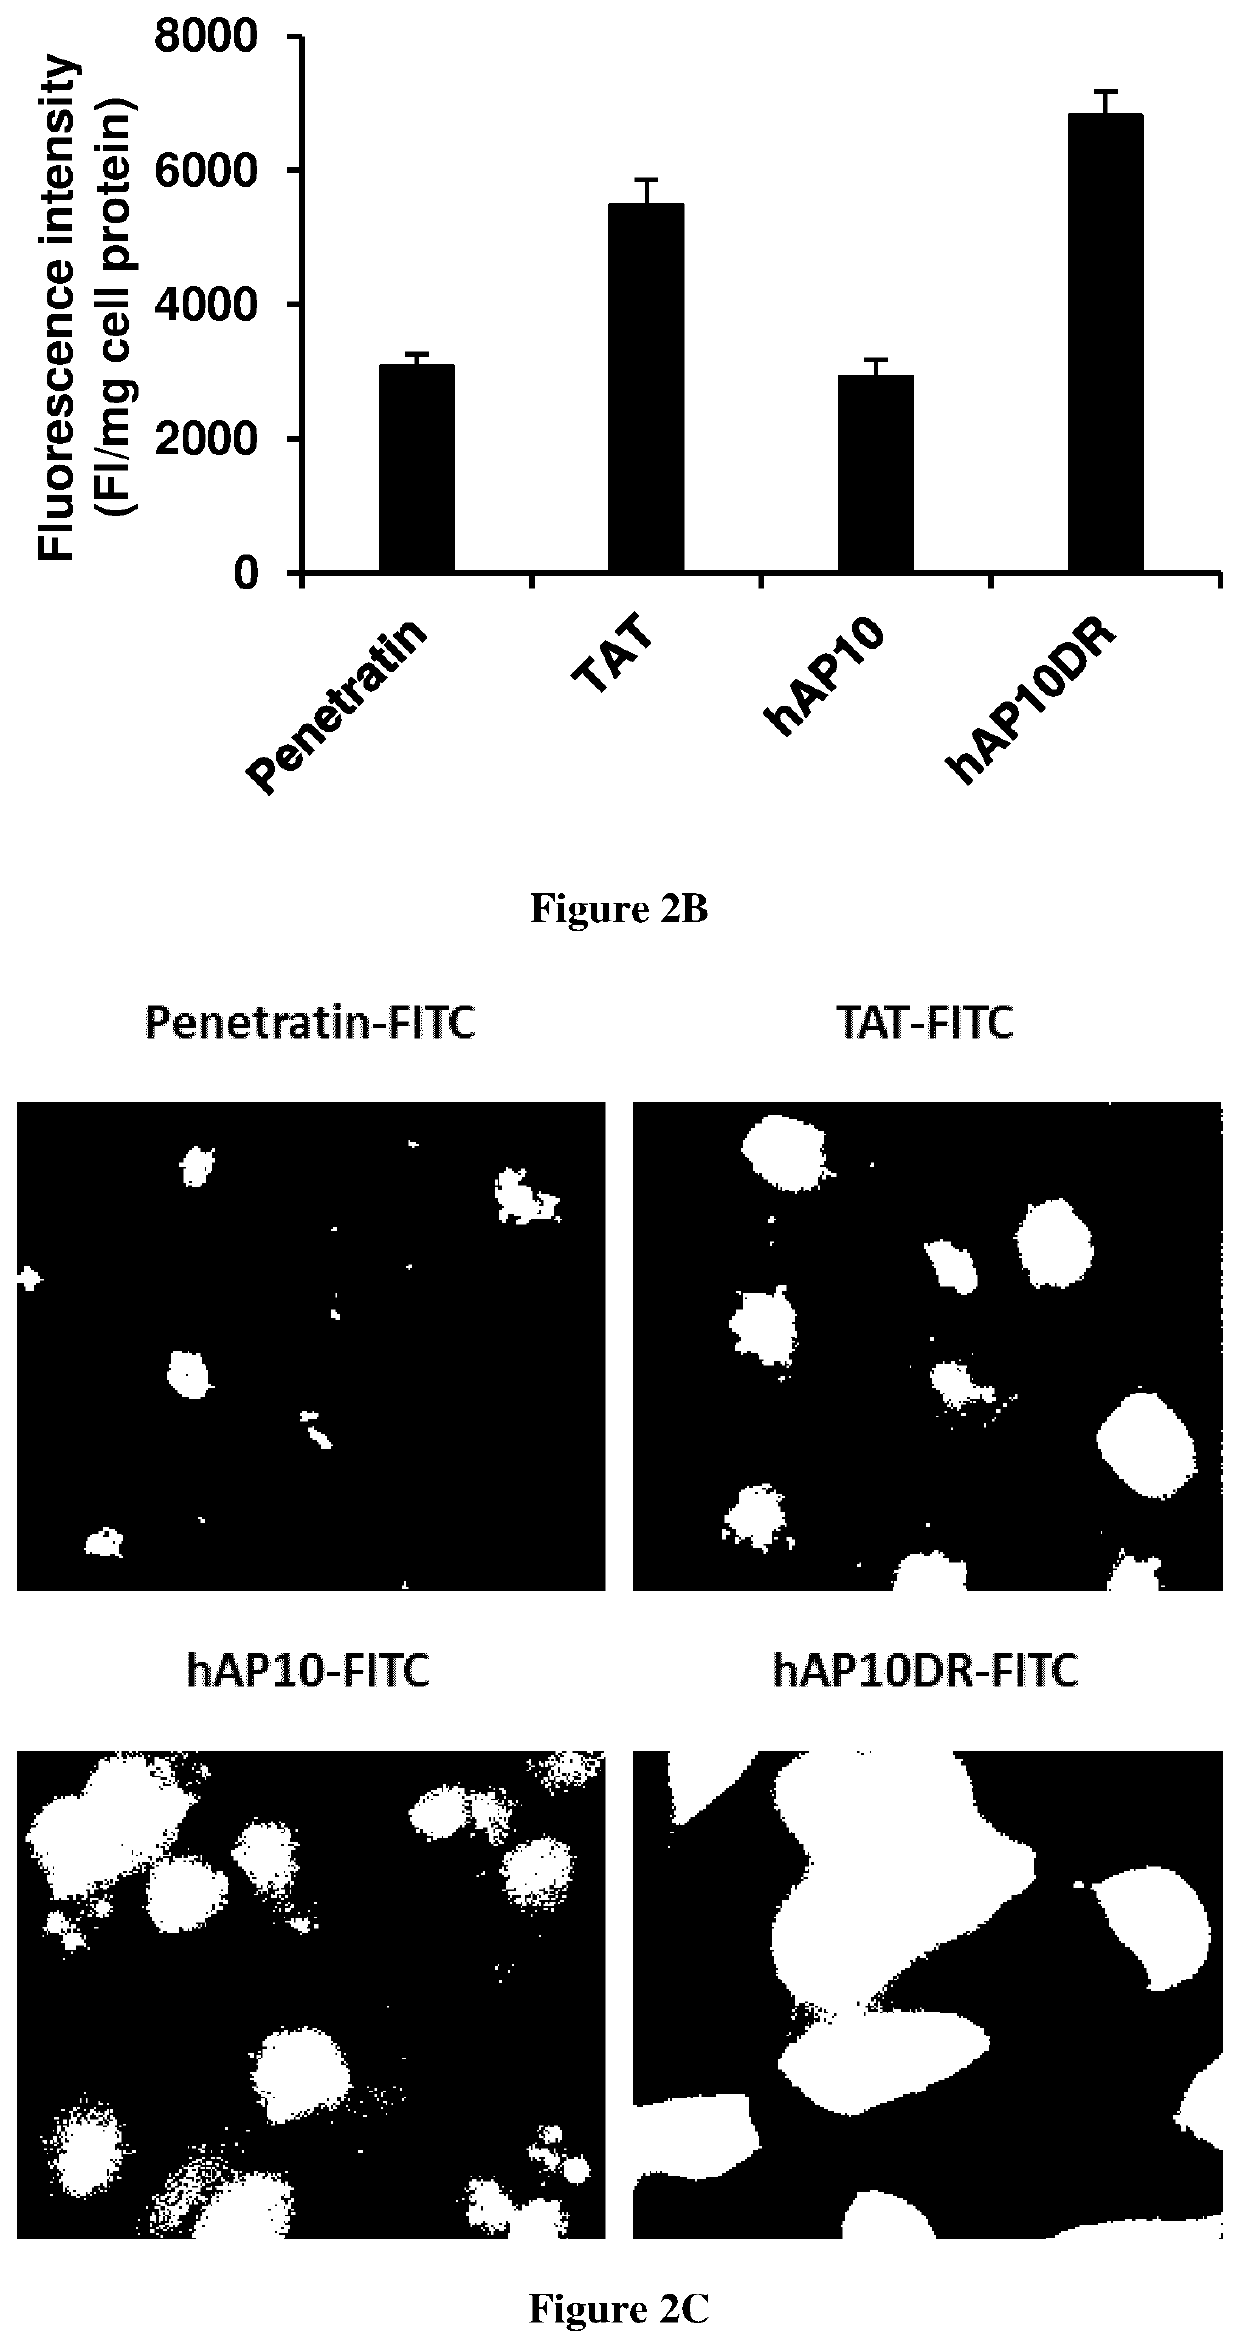 Cell penetrating peptides for intracellular delivery of molecules